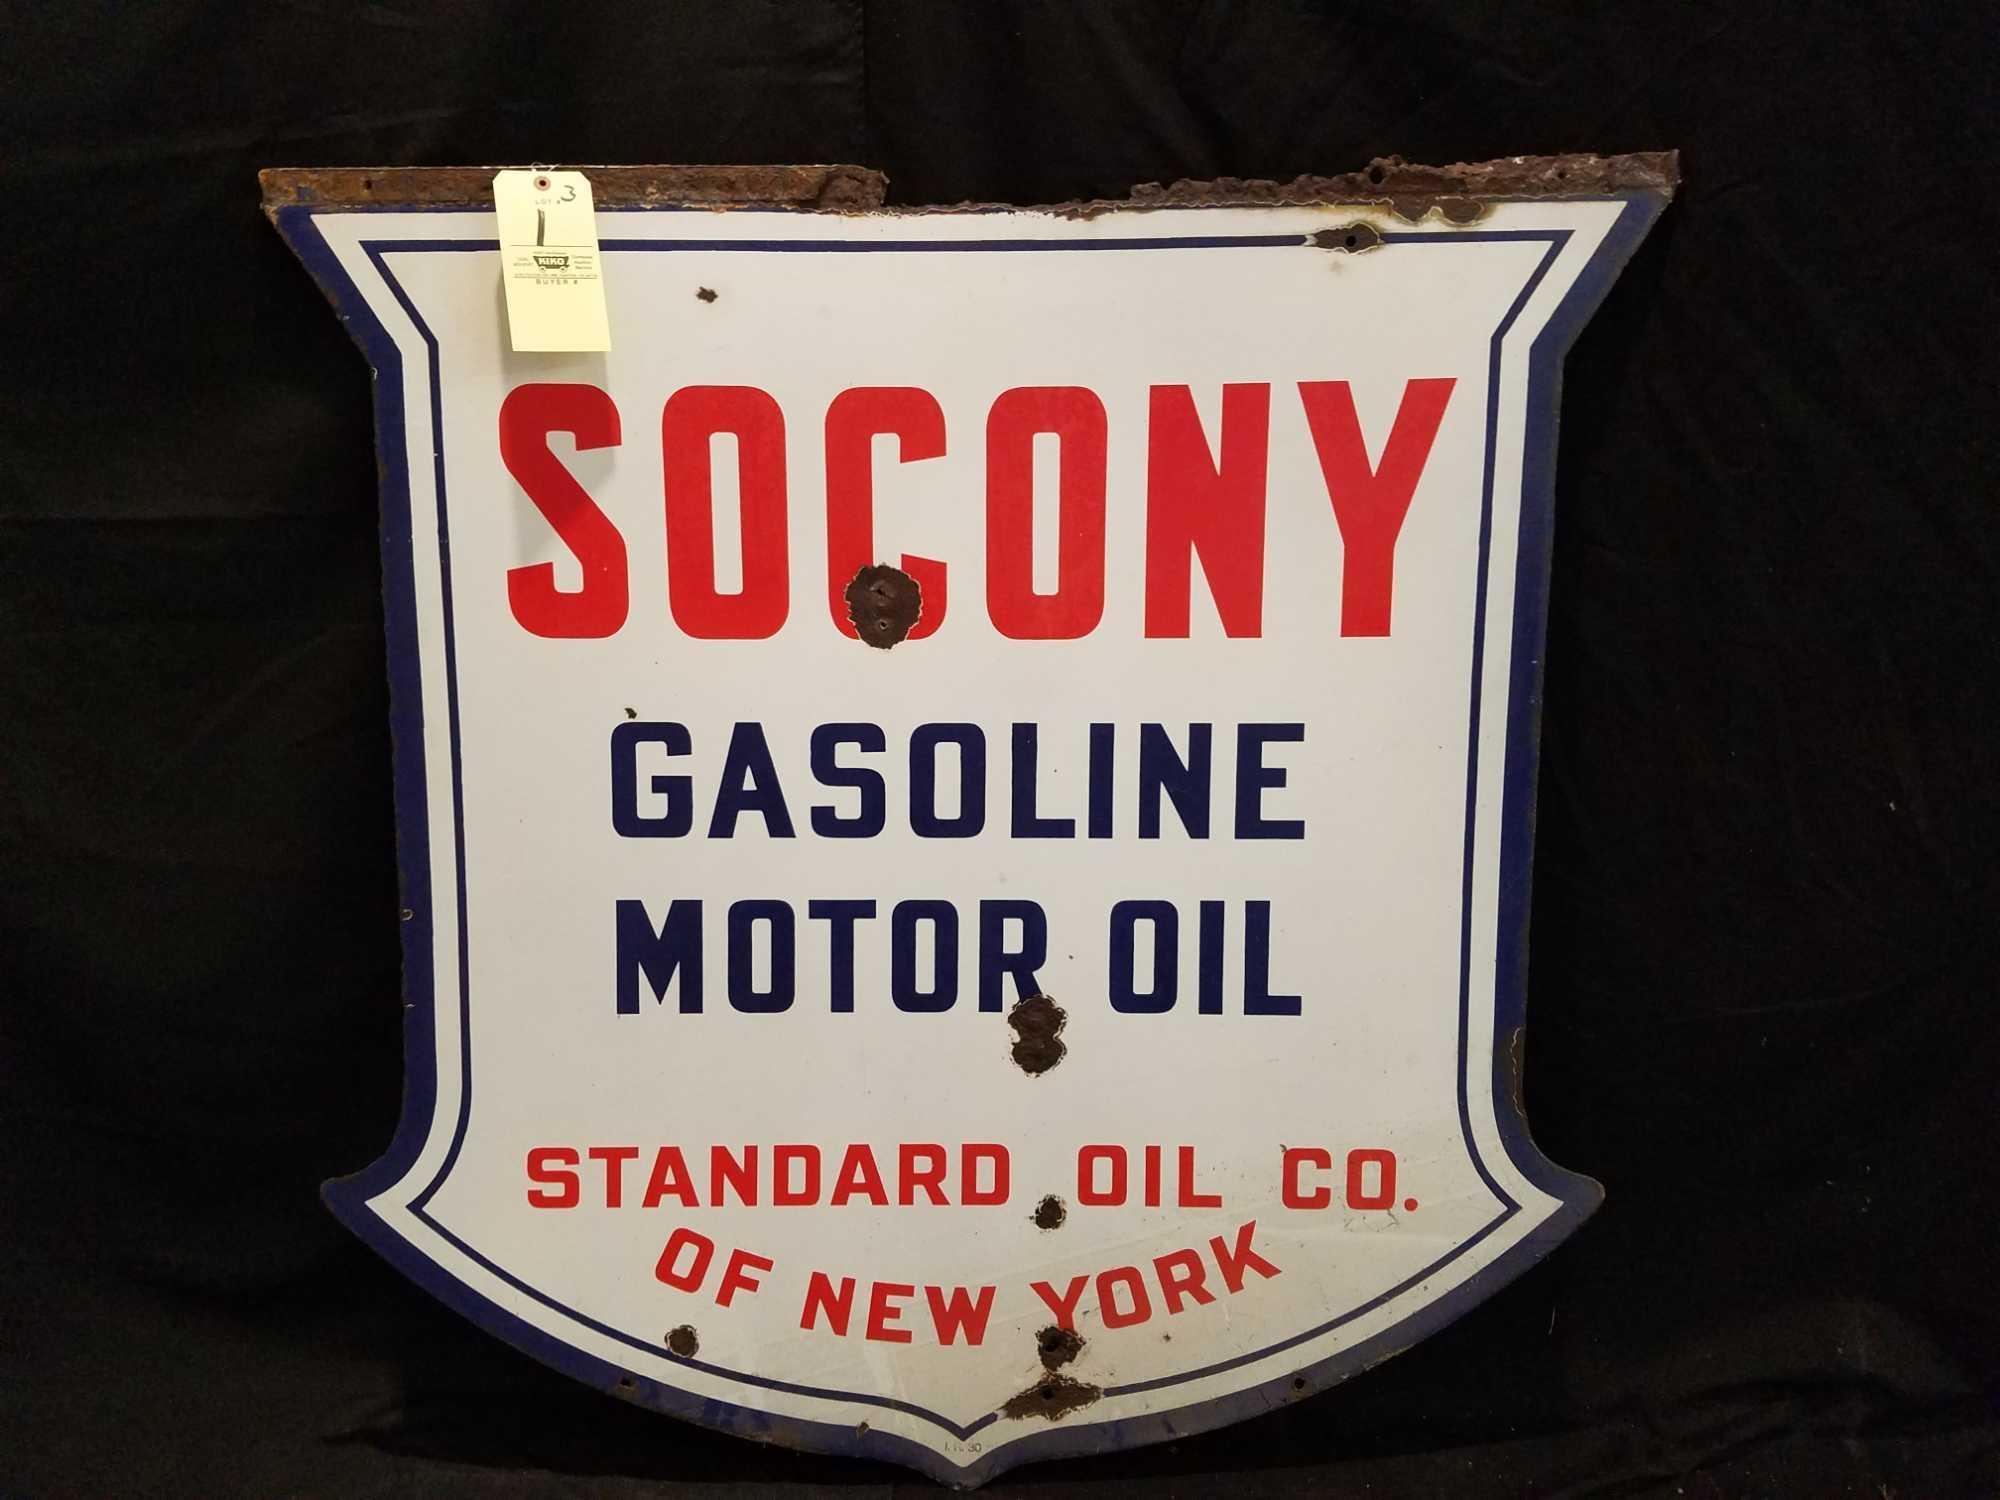 Socony Gasoline Motor Oil, Standard Oil Co. double sided porc. sign, 48 x 48 inches